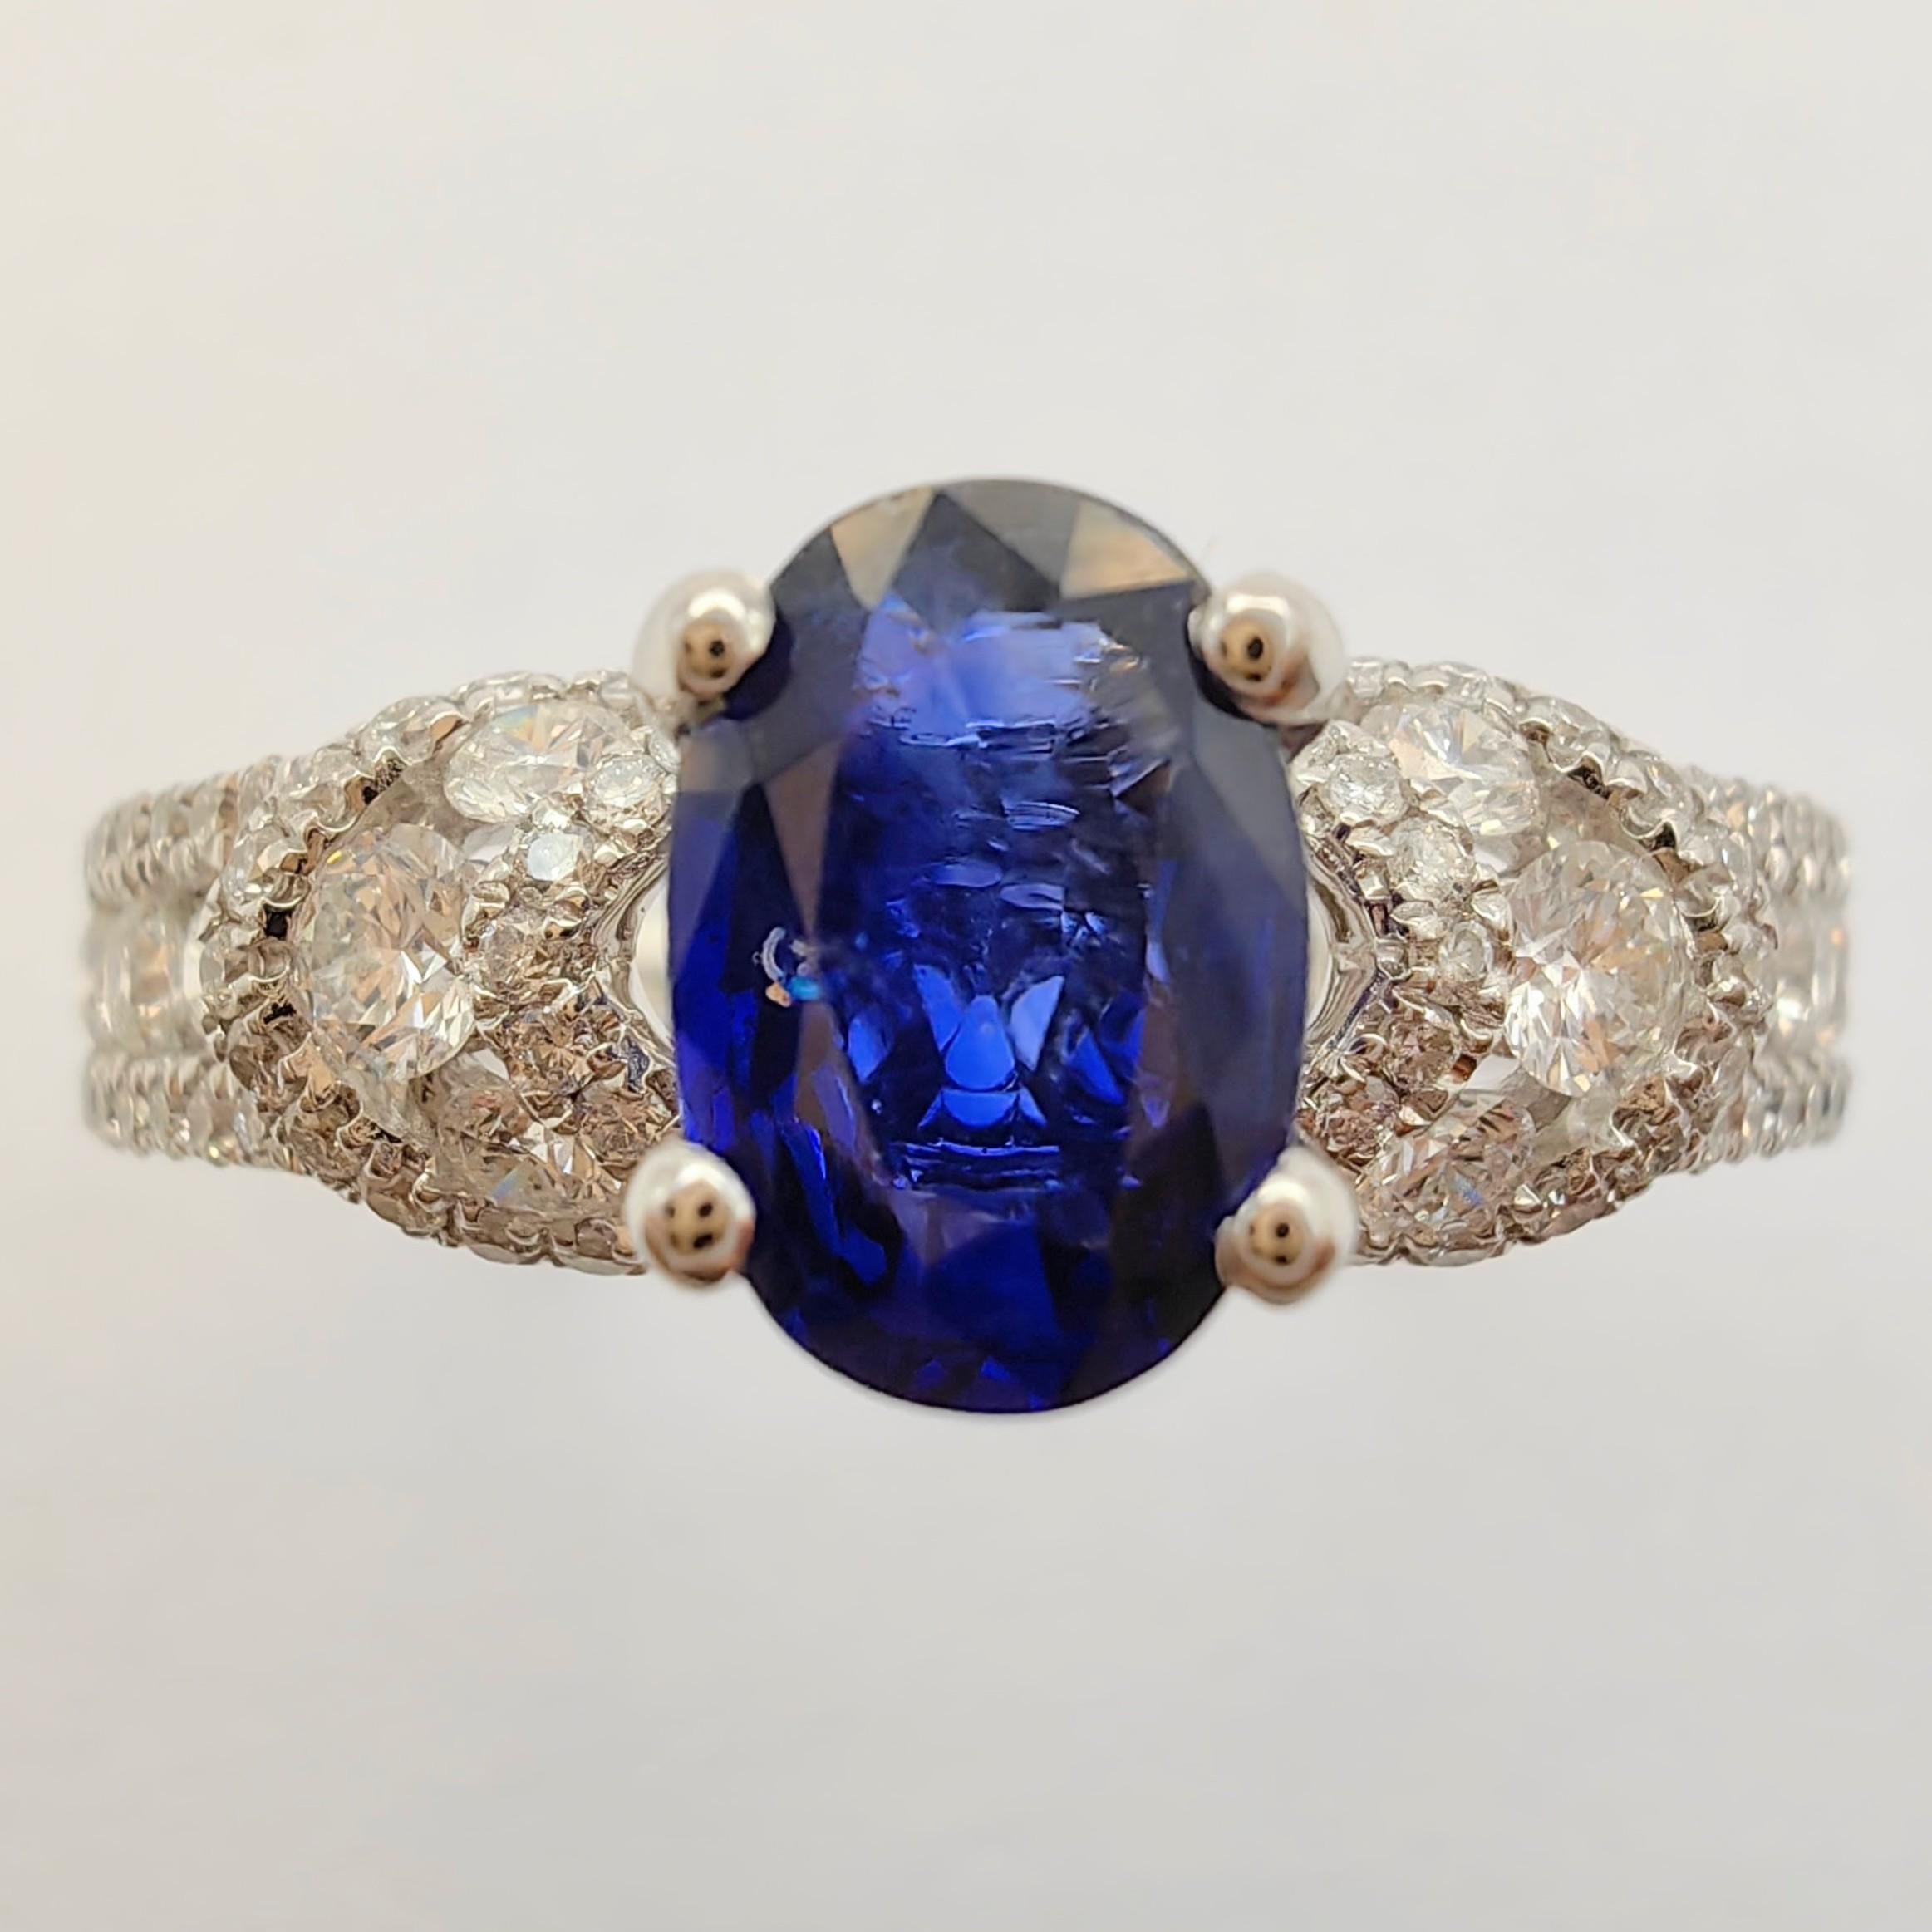 Introducing our stunning .88 Carat Oval-Cut Sapphire 88 Diamond Cluster Ring in 18k White Gold. This exquisite piece of jewelry is a true testament to sophistication and elegance. Crafted with precision and care, this stunning ring features a